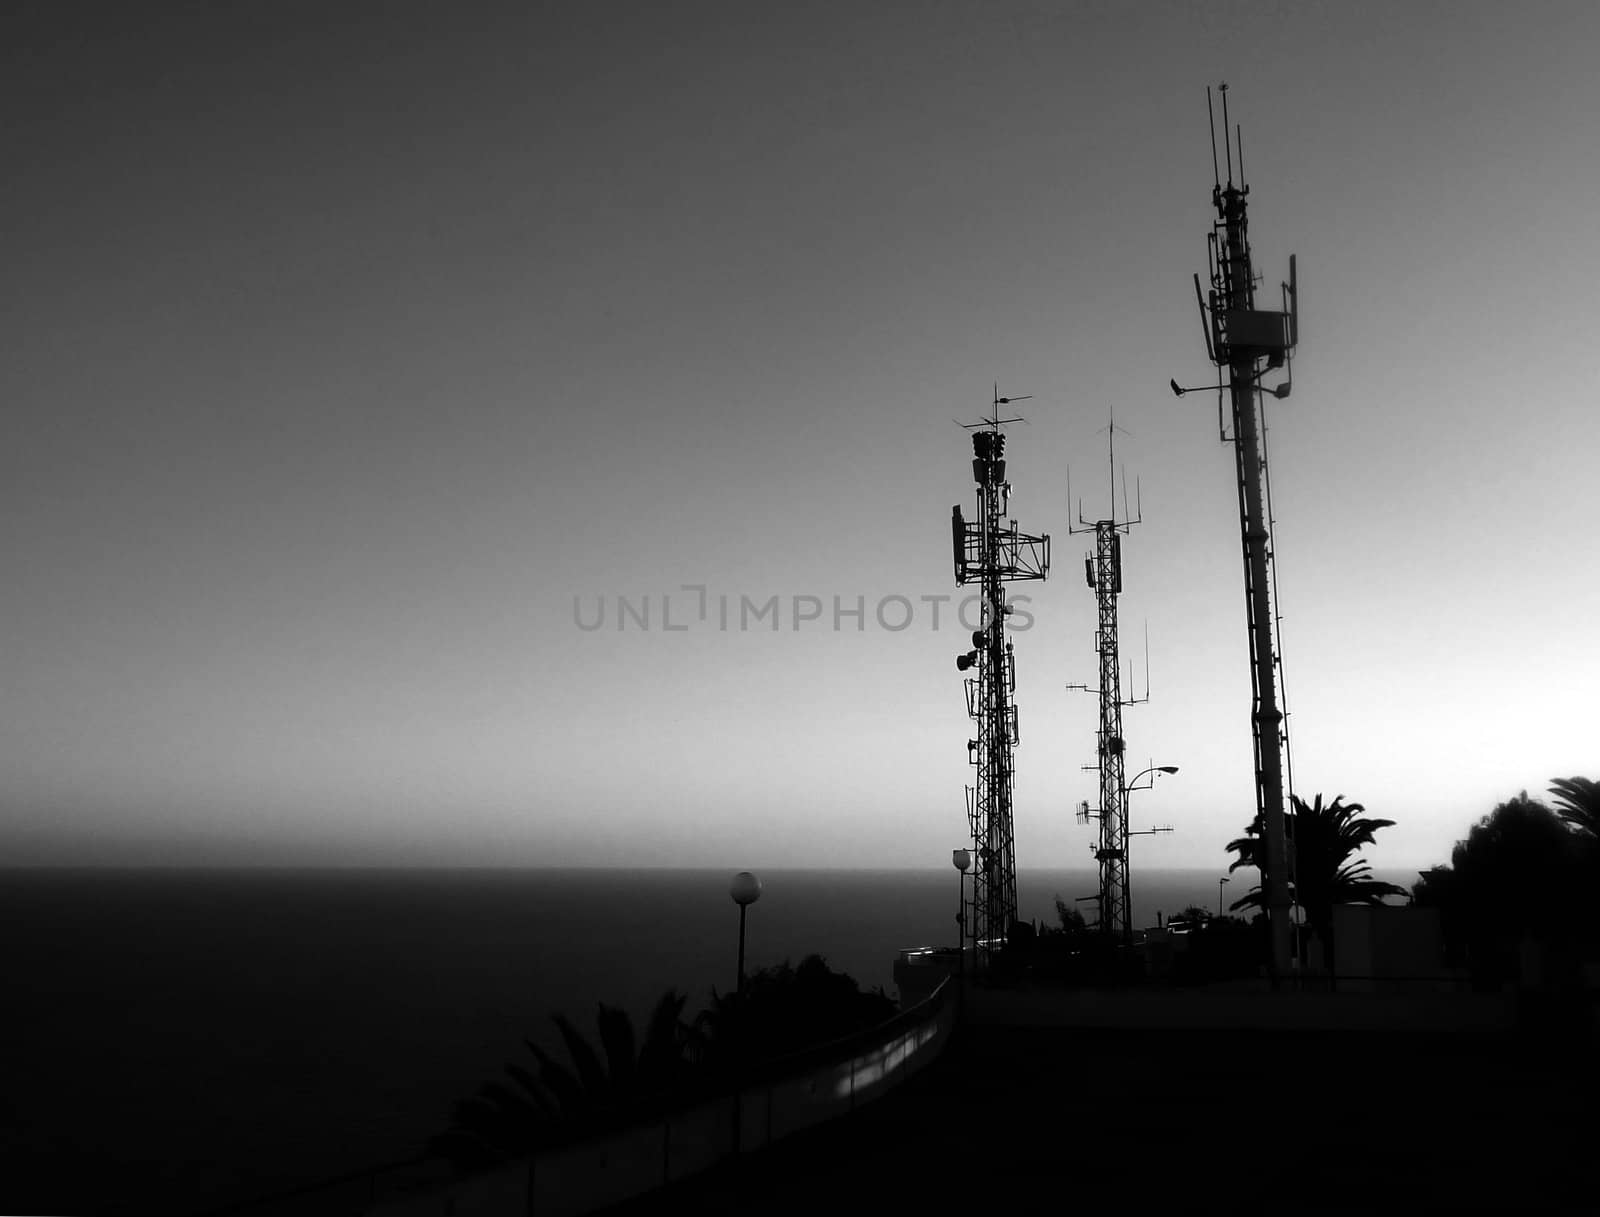 A set of mobile phone masts in Gran Canaria.